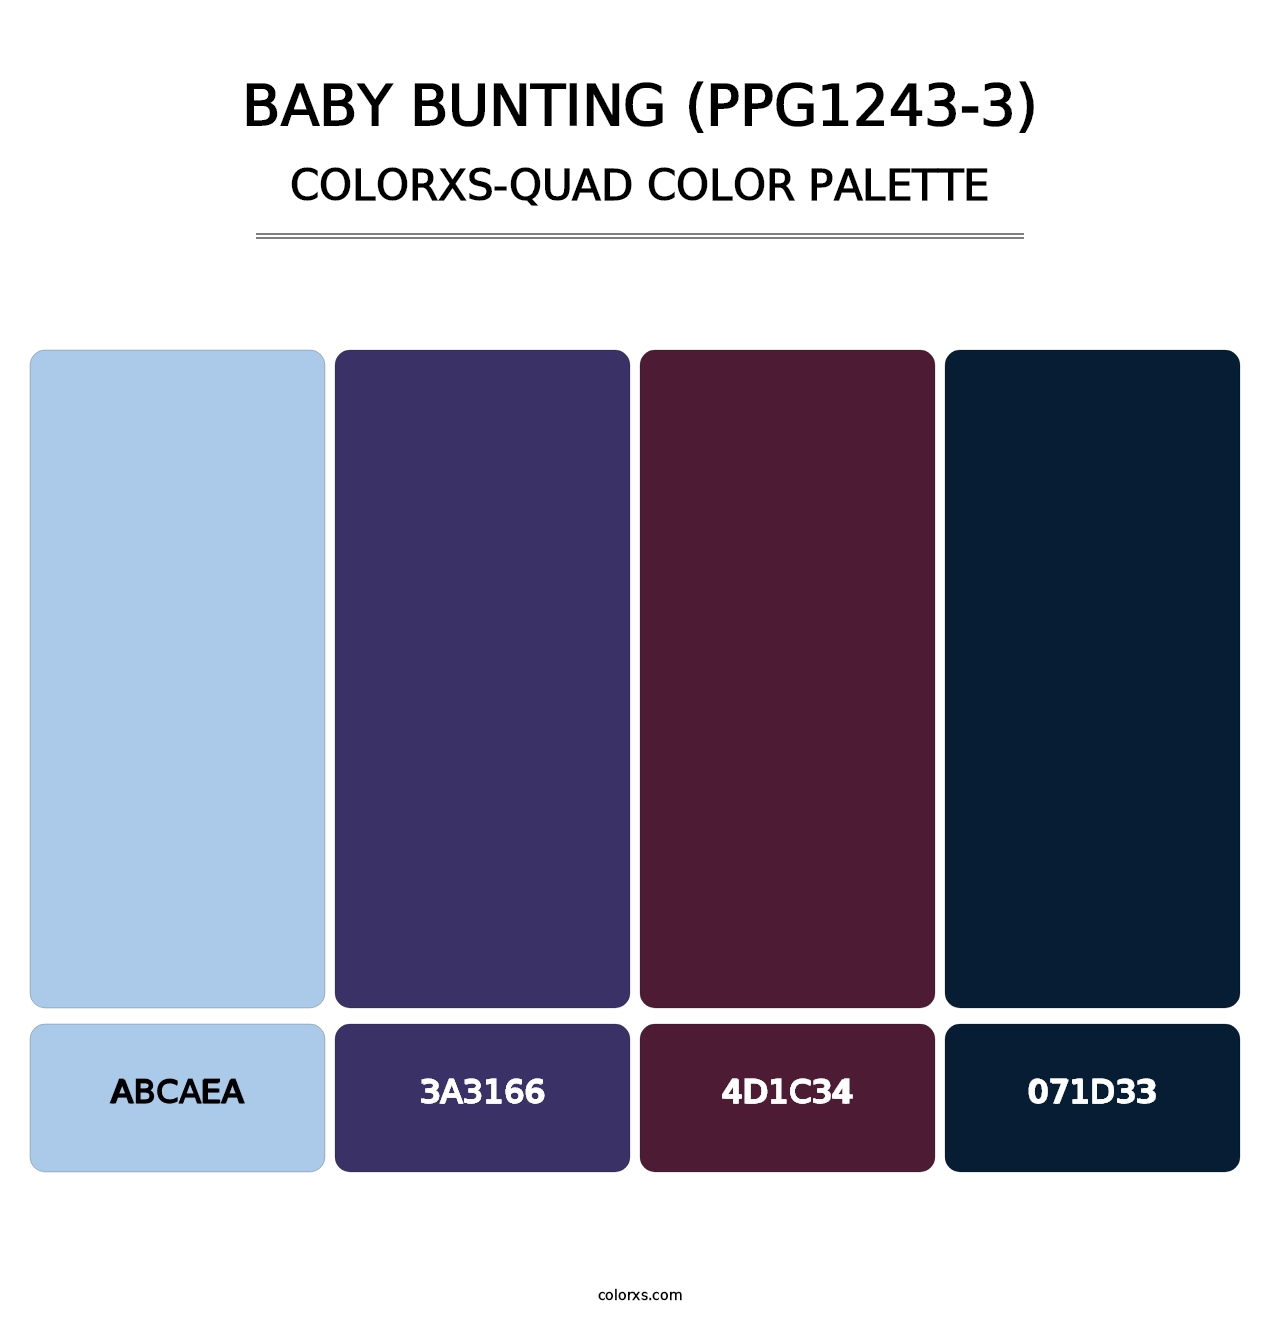 Baby Bunting (PPG1243-3) - Colorxs Quad Palette